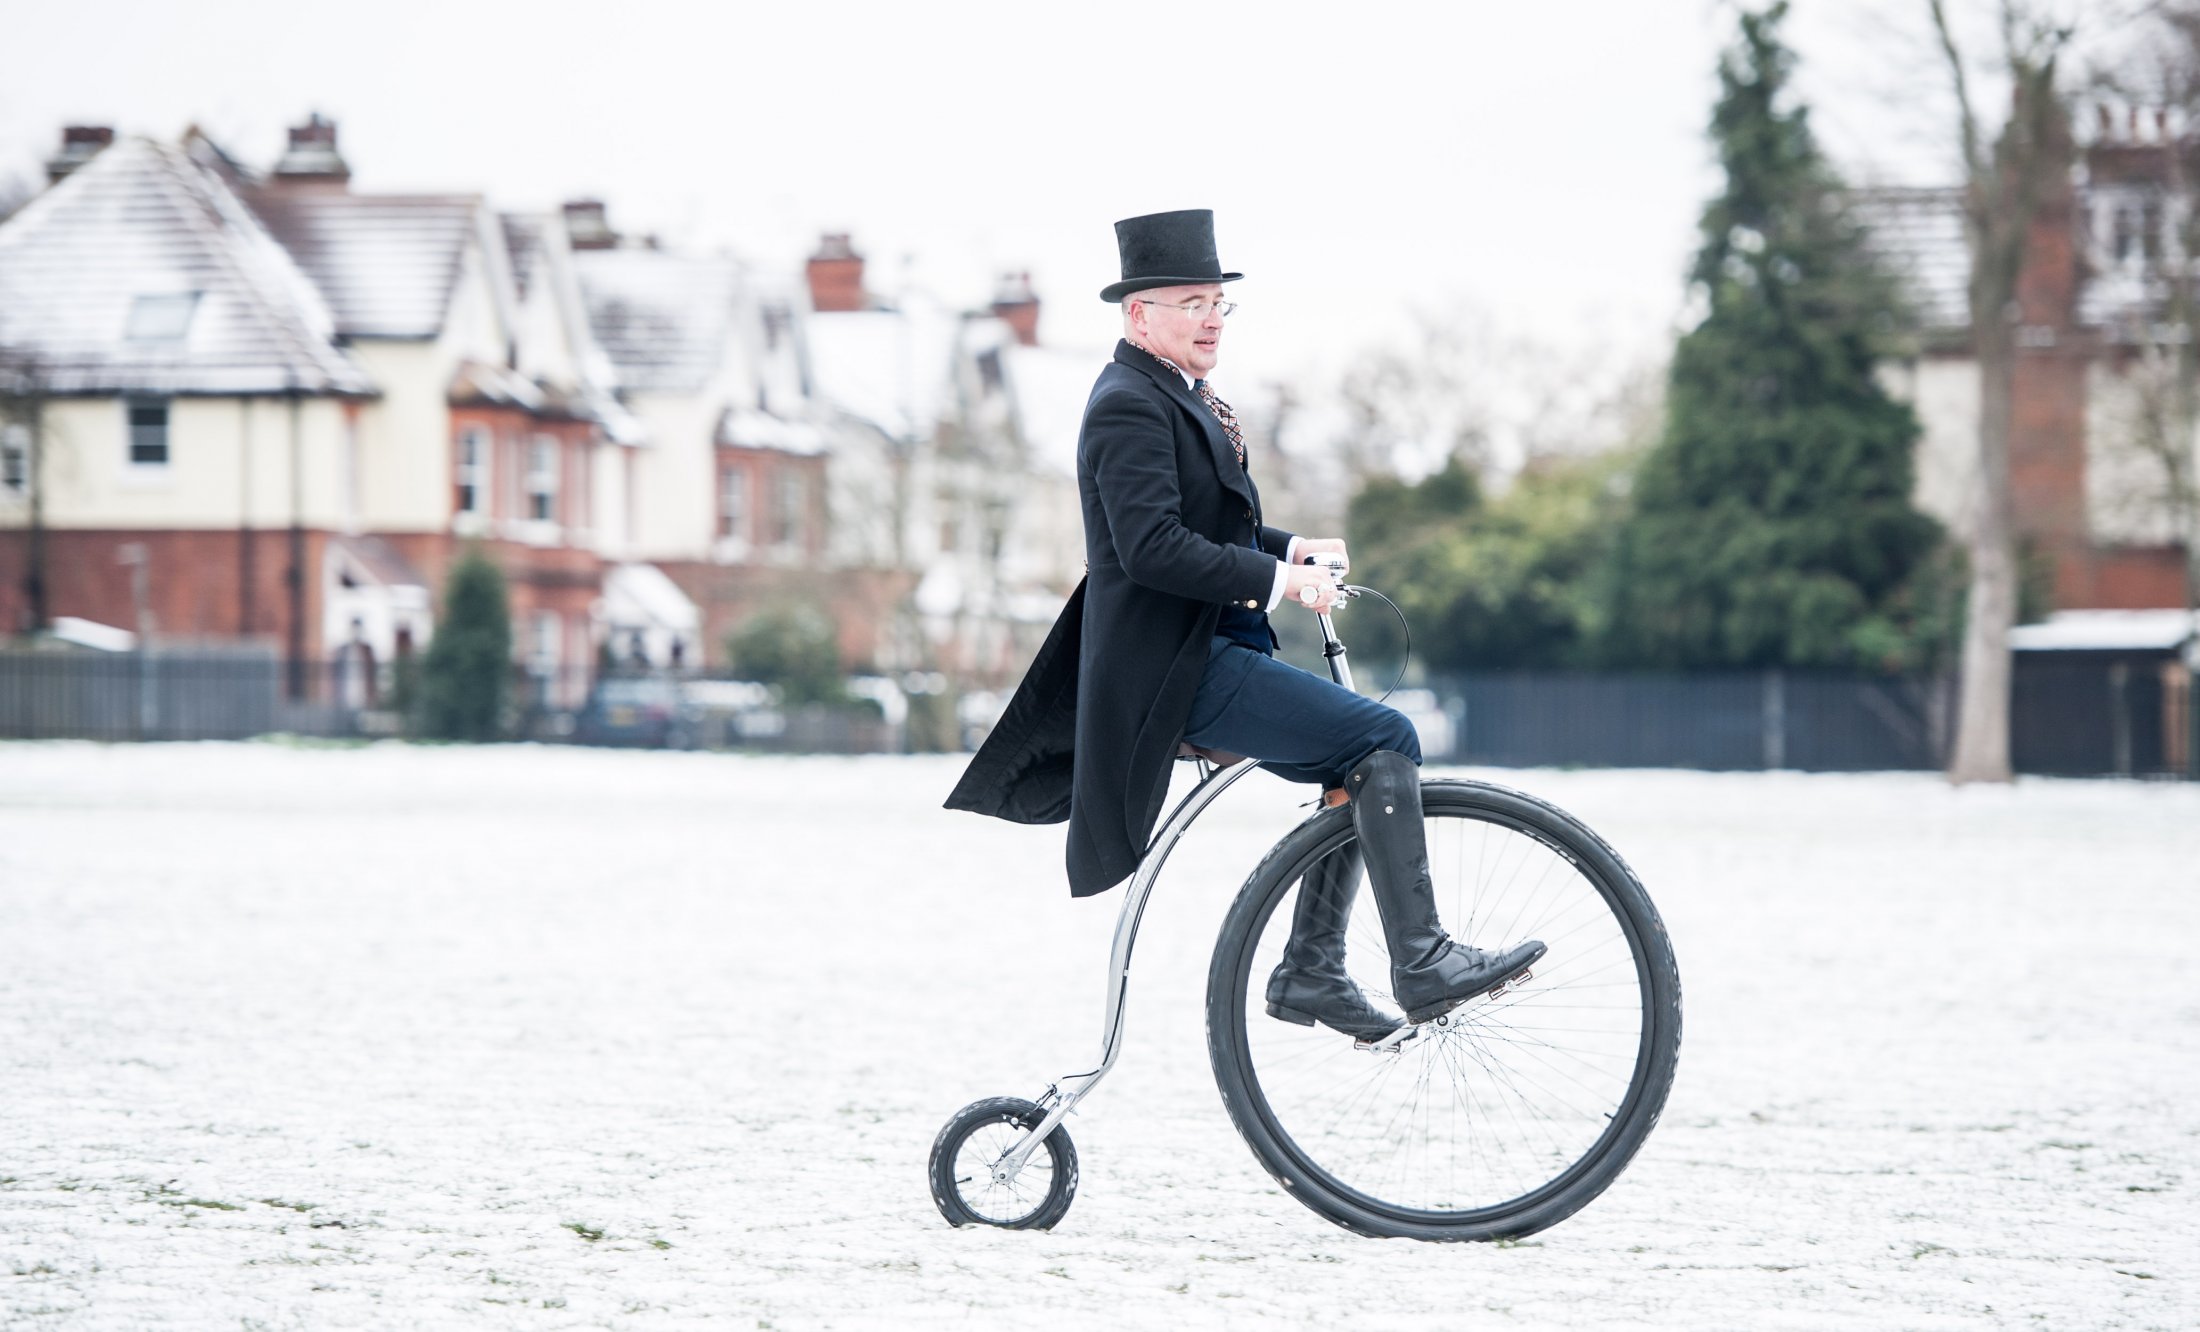 Penny-farthing recreation at Victoria Recreation Ground, Wheels of Time. Photo: Charlotte Levy